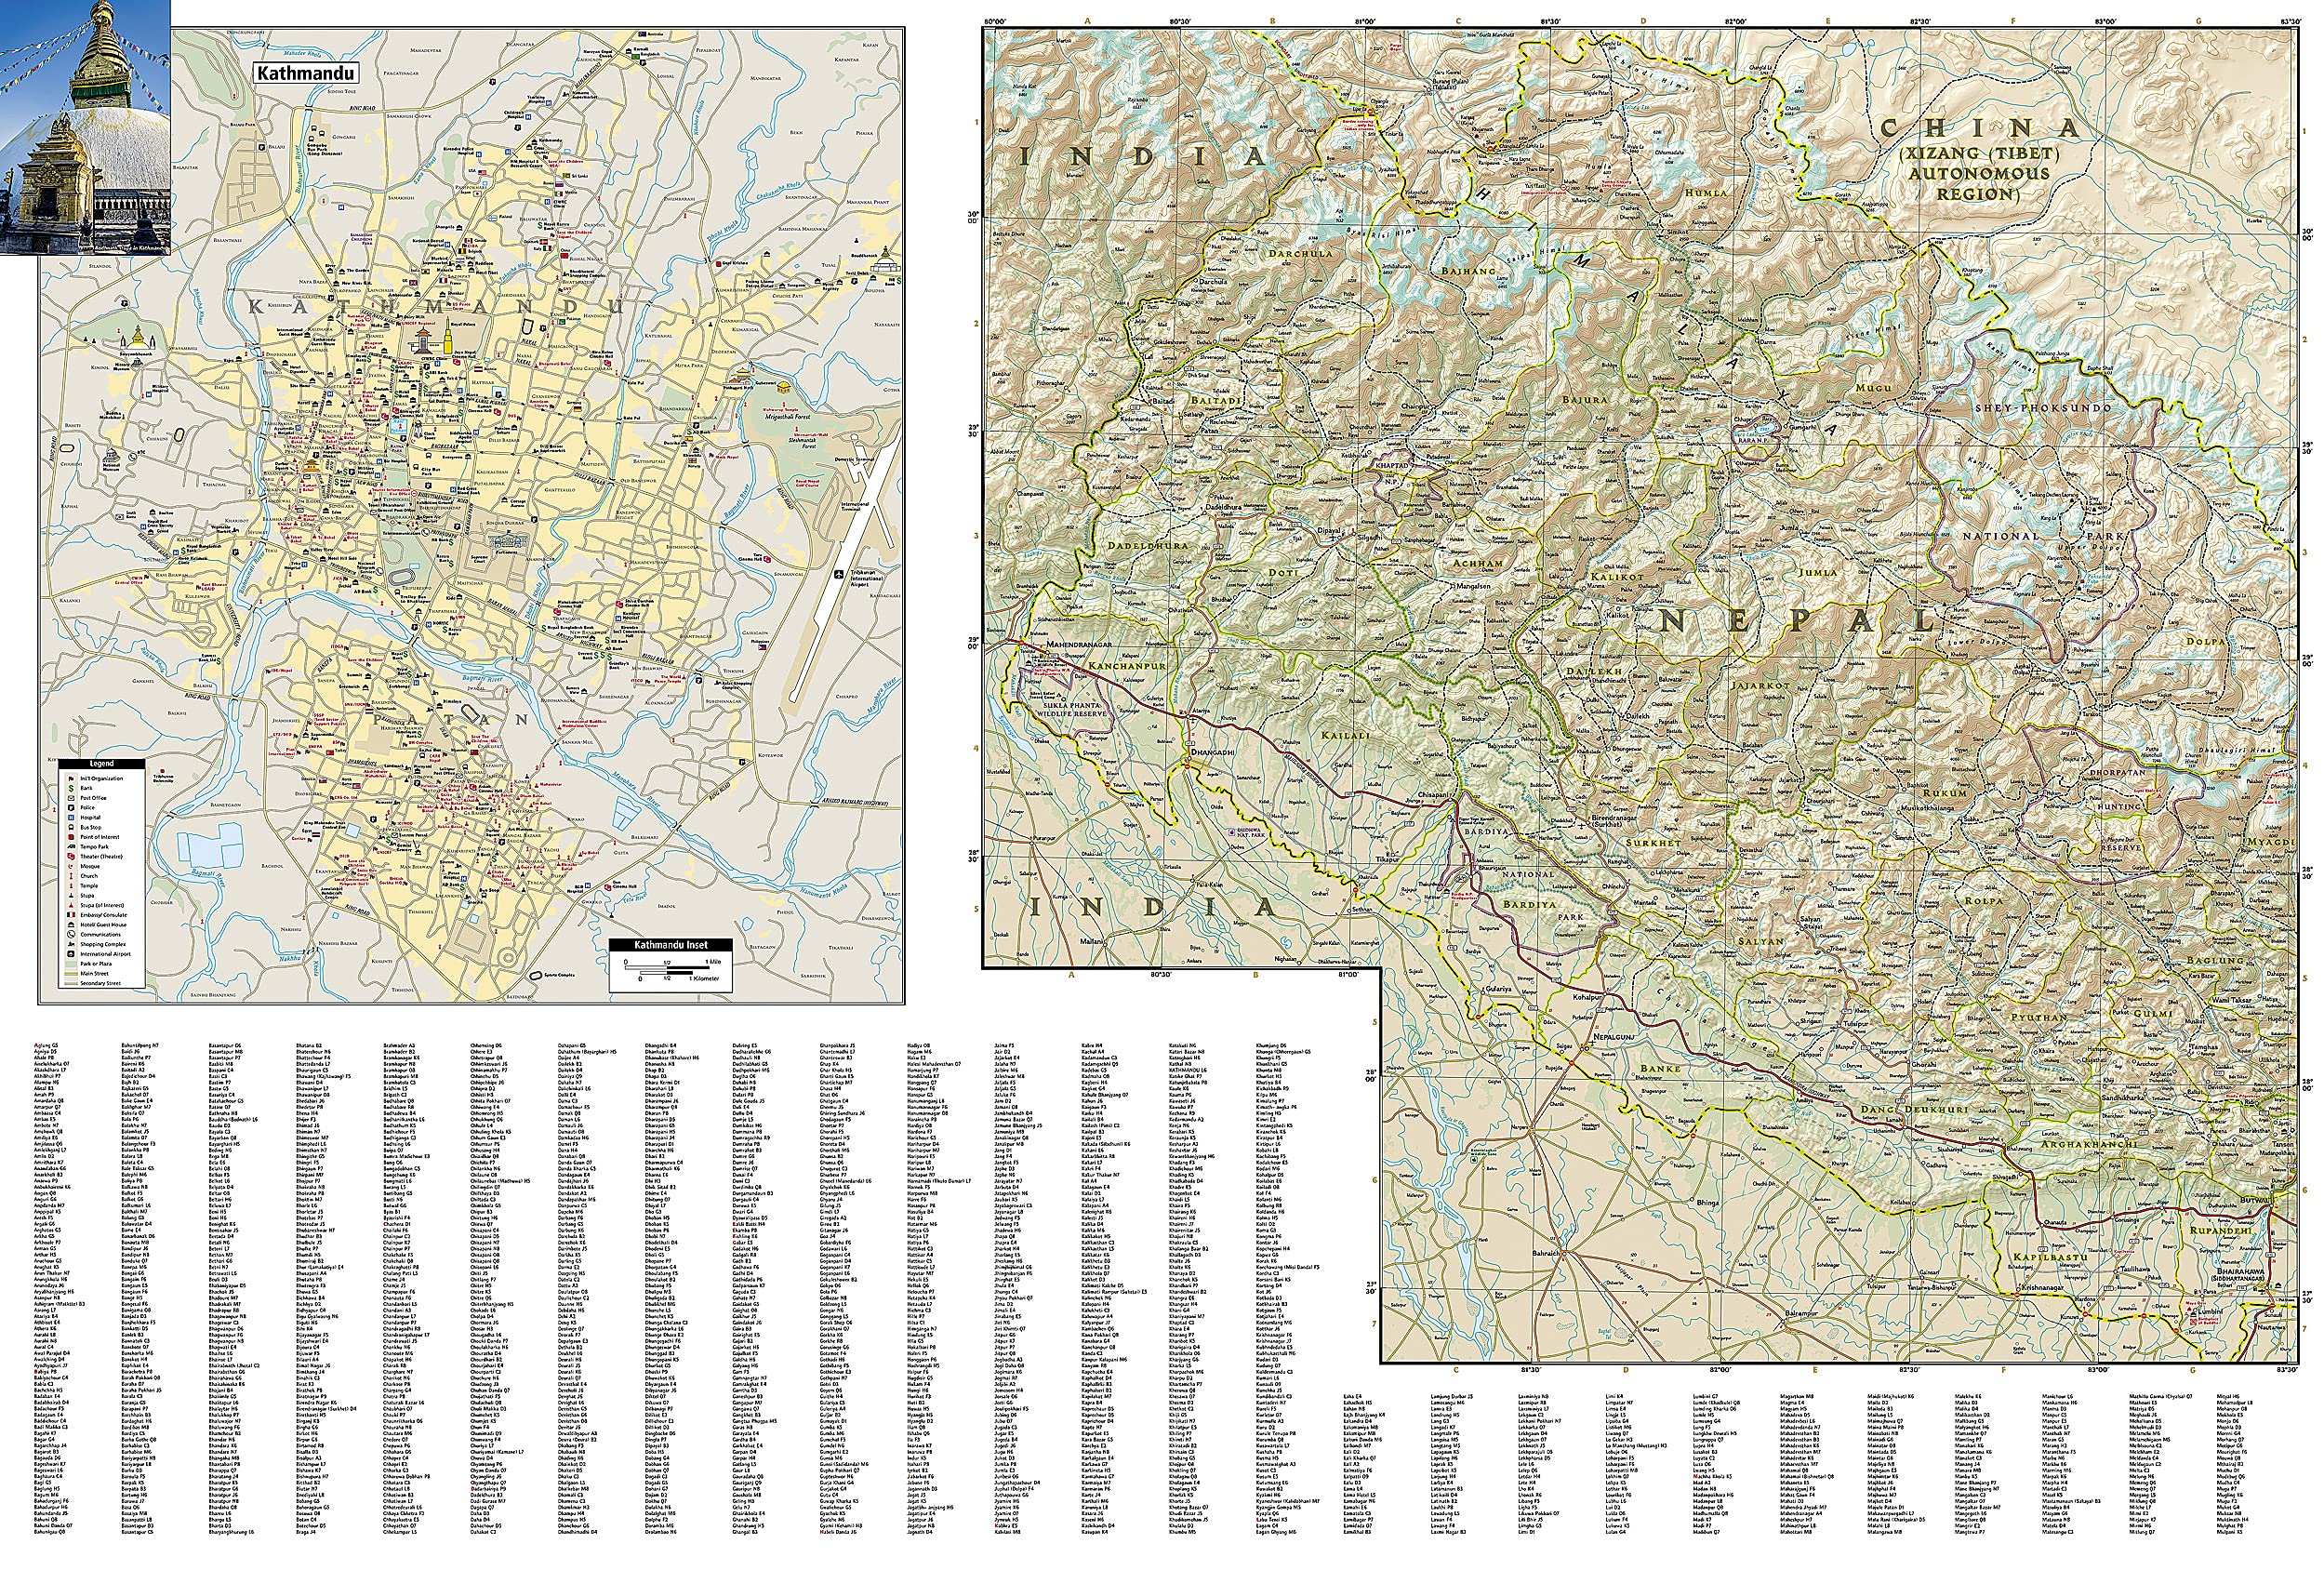 Nepal Map (National Geographic Adventure Map, 3000)